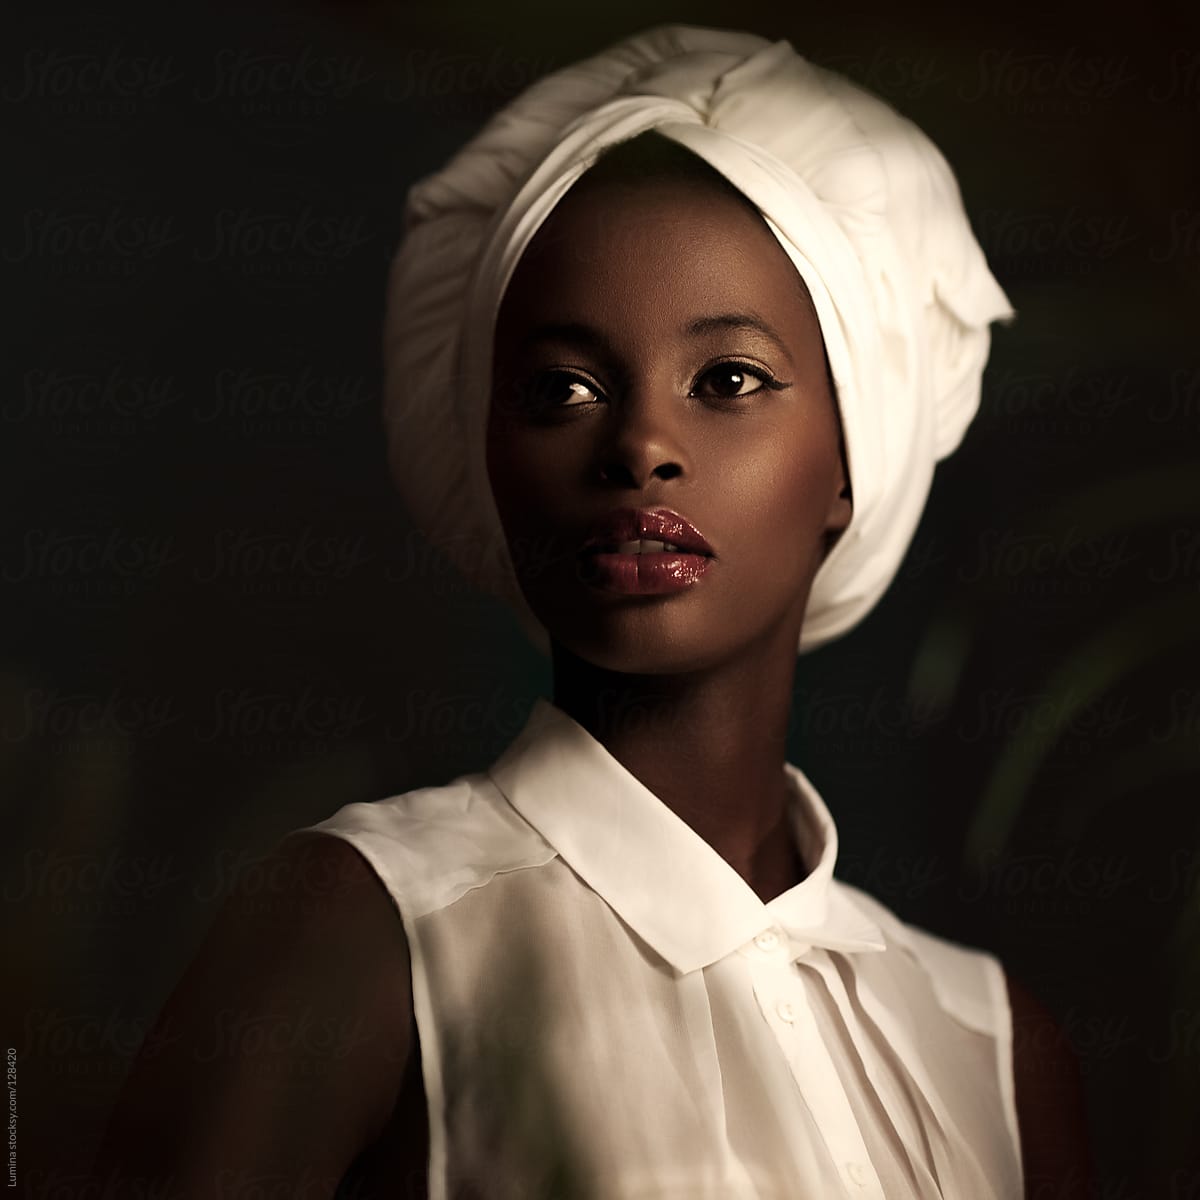 African Woman With A White Turban By Lumina